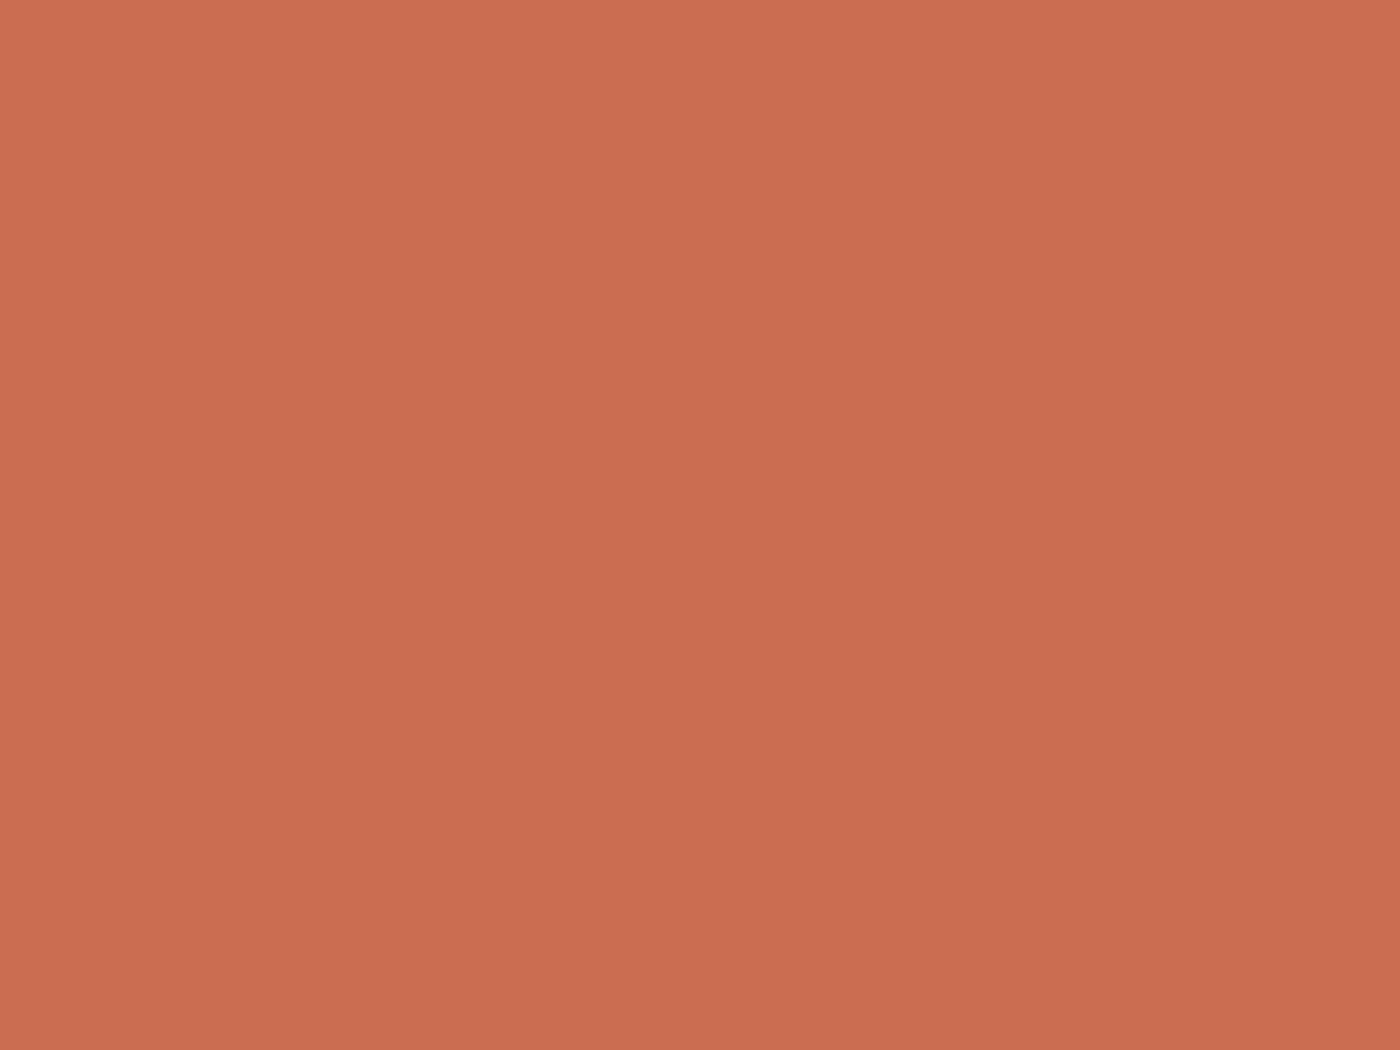 1400x1050 Copper Red Solid Color Background